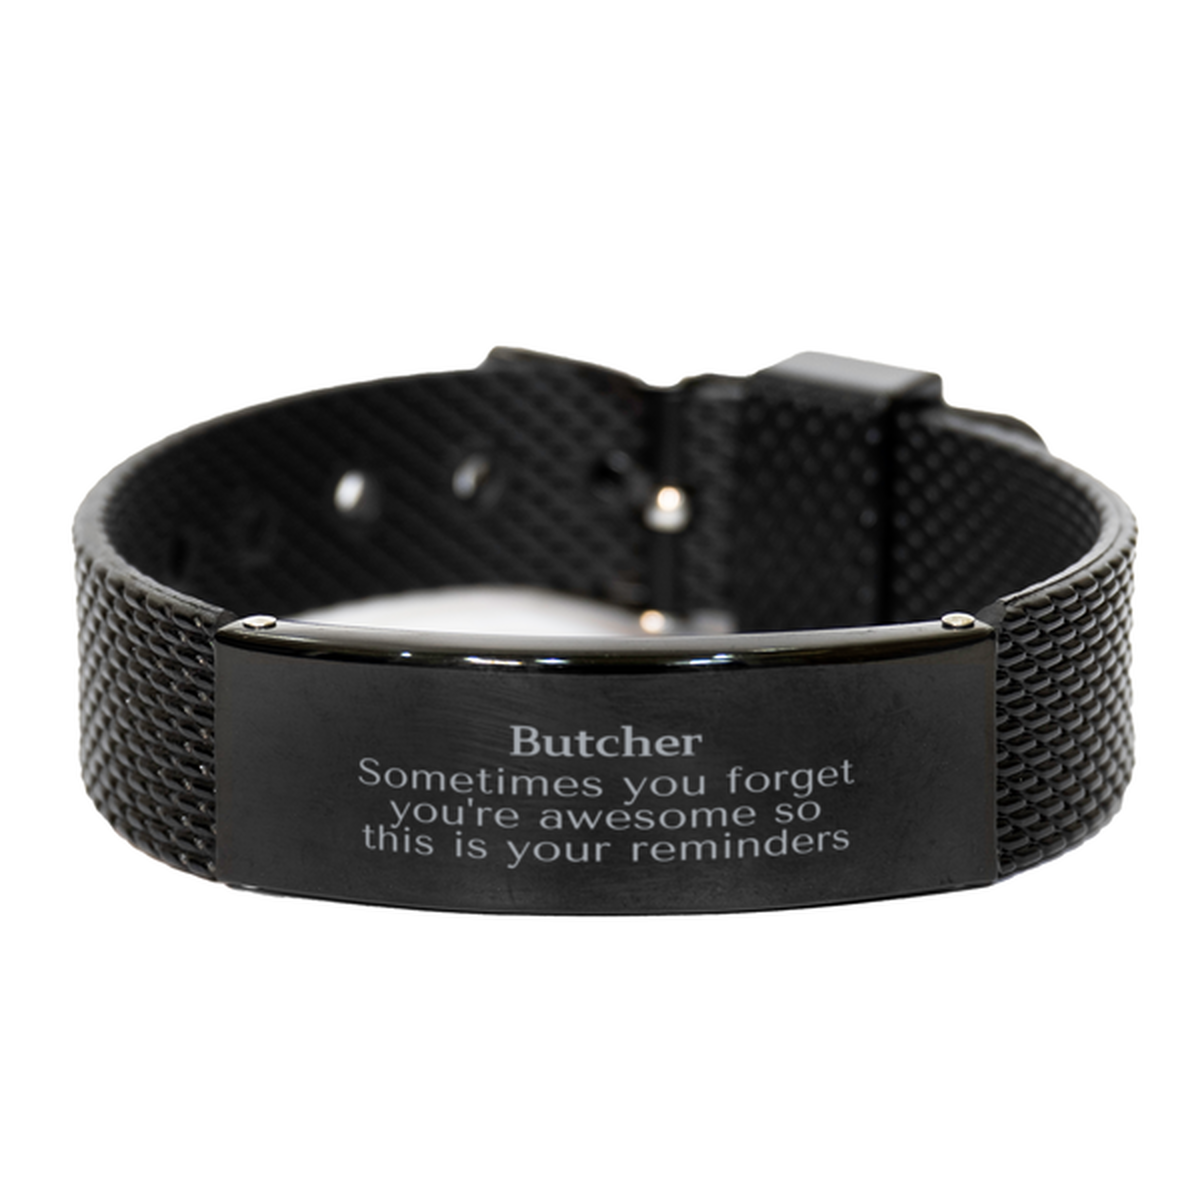 Sentimental Butcher Black Shark Mesh Bracelet, Butcher Sometimes you forget you're awesome so this is your reminders, Graduation Christmas Birthday Gifts for Butcher, Men, Women, Coworkers